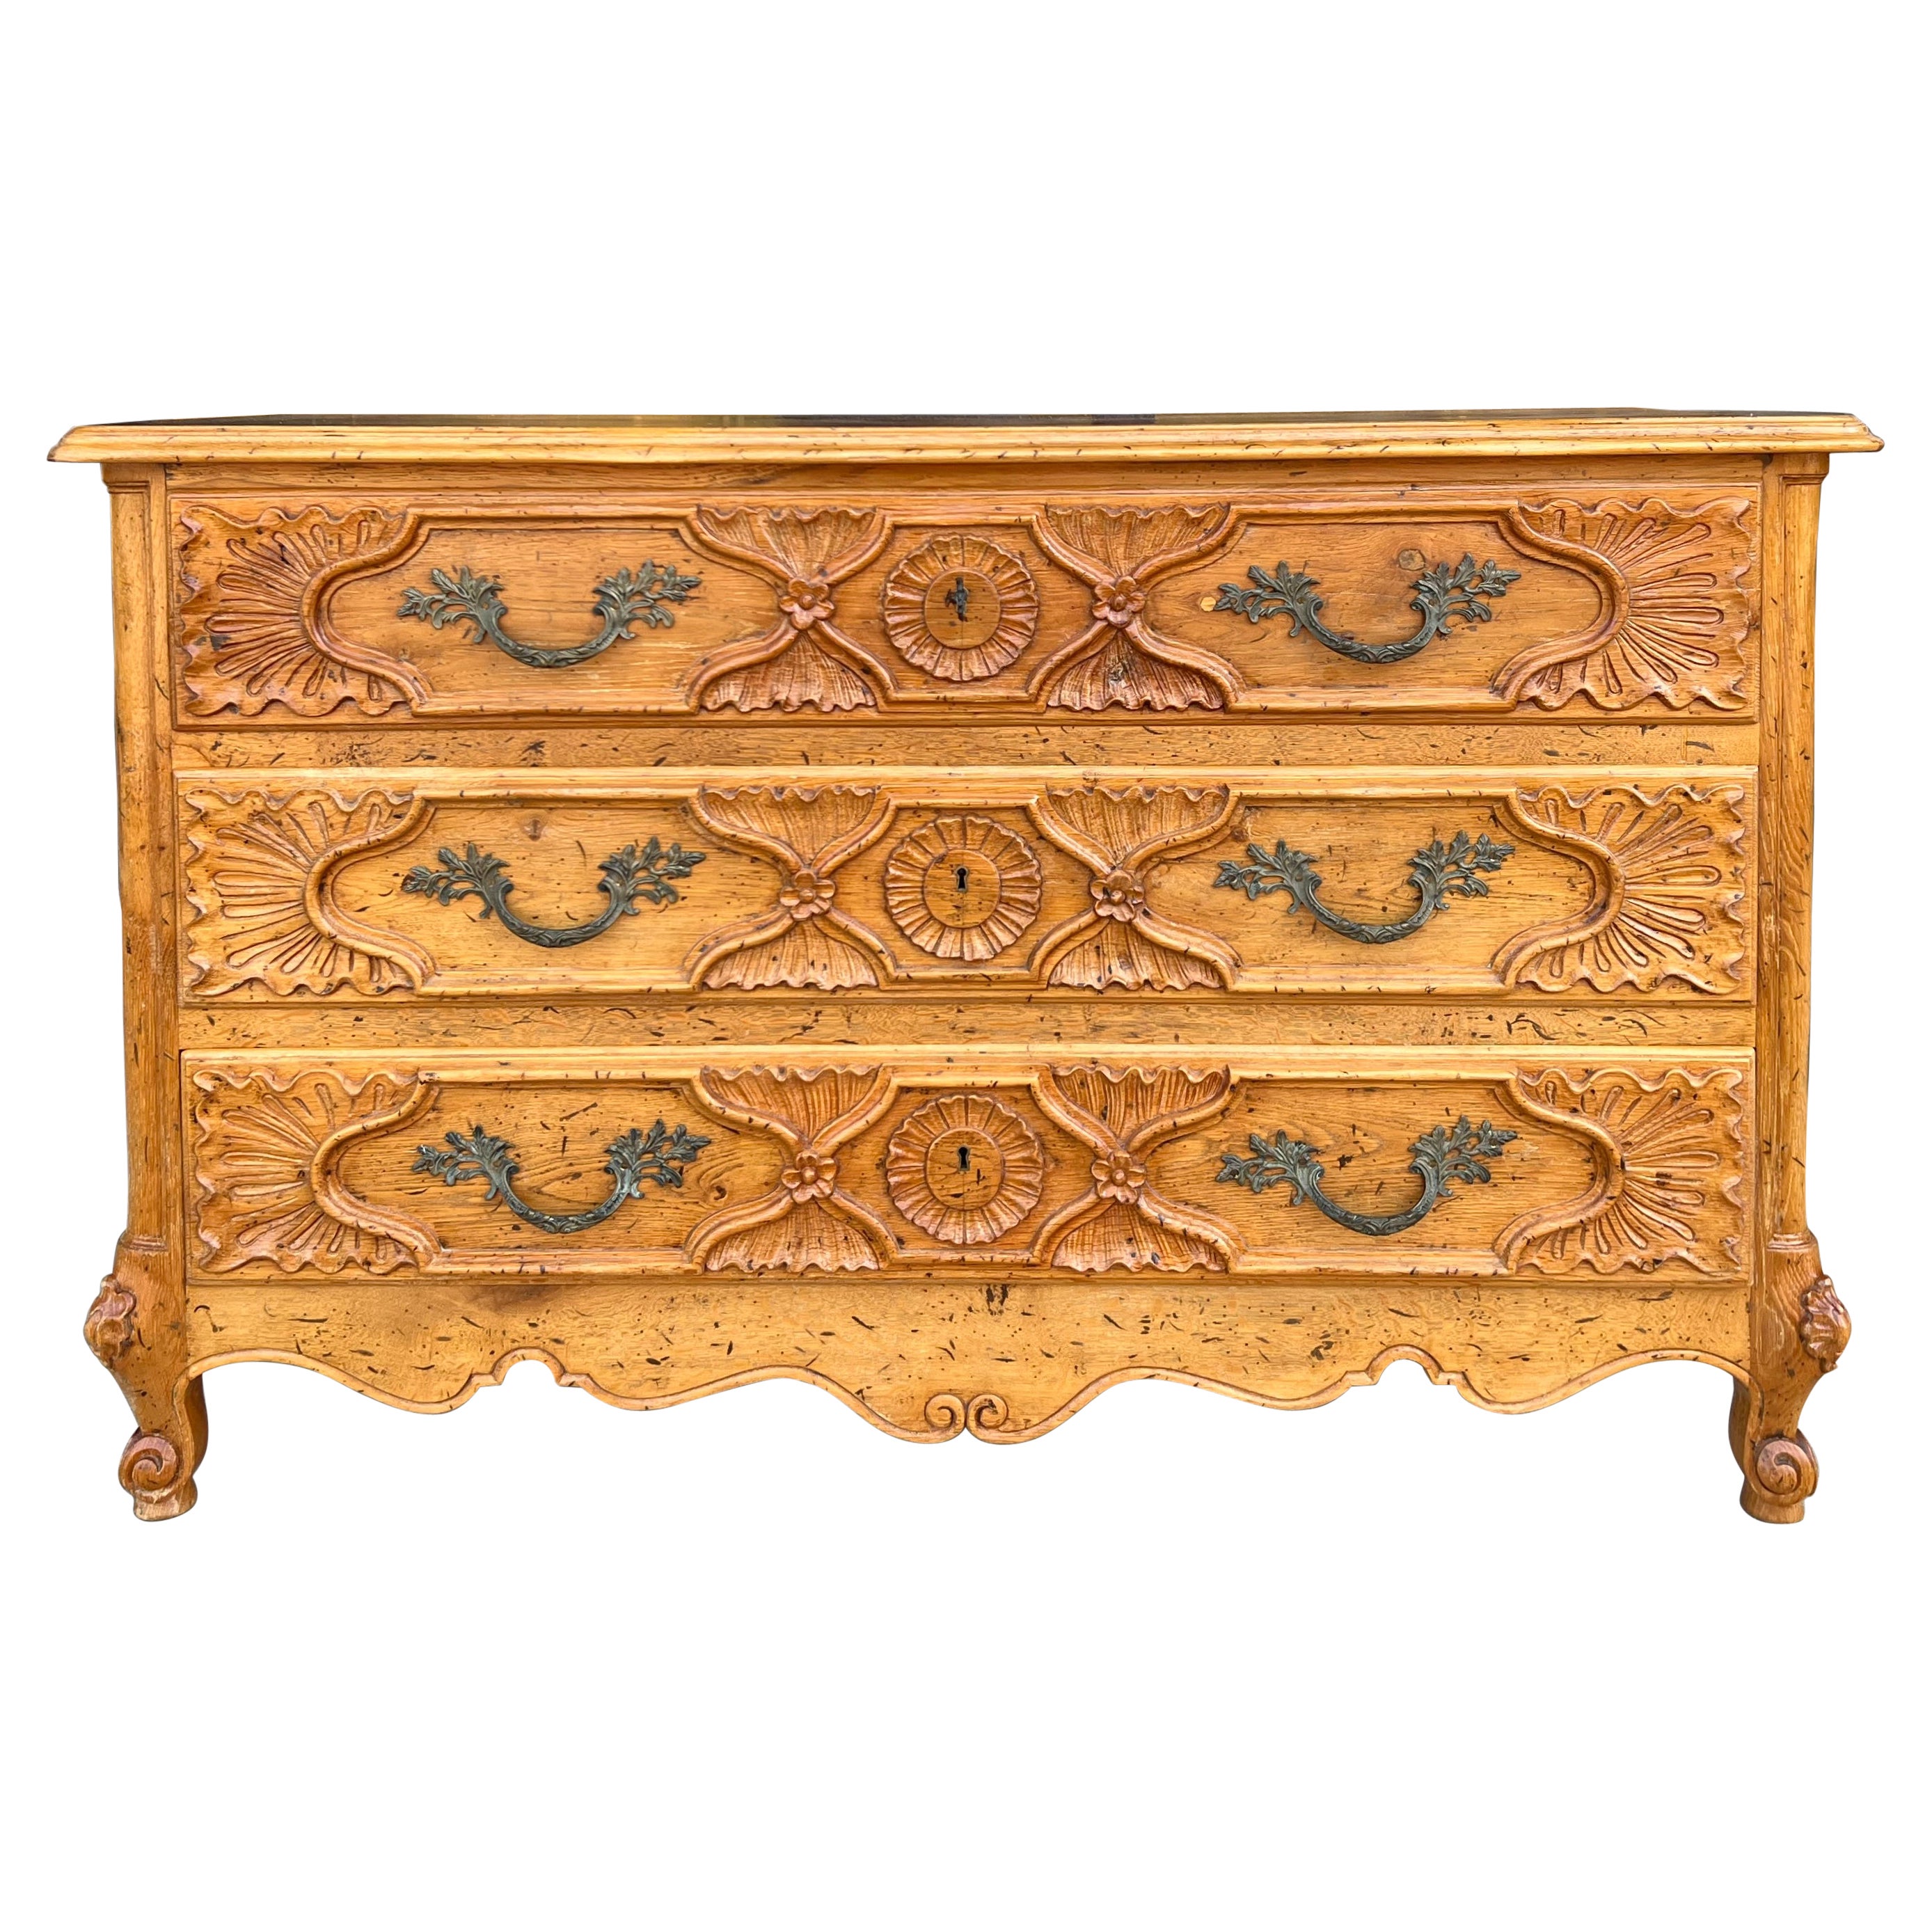 1950s French Louis XIV Style Carved Pine Chest / Commode